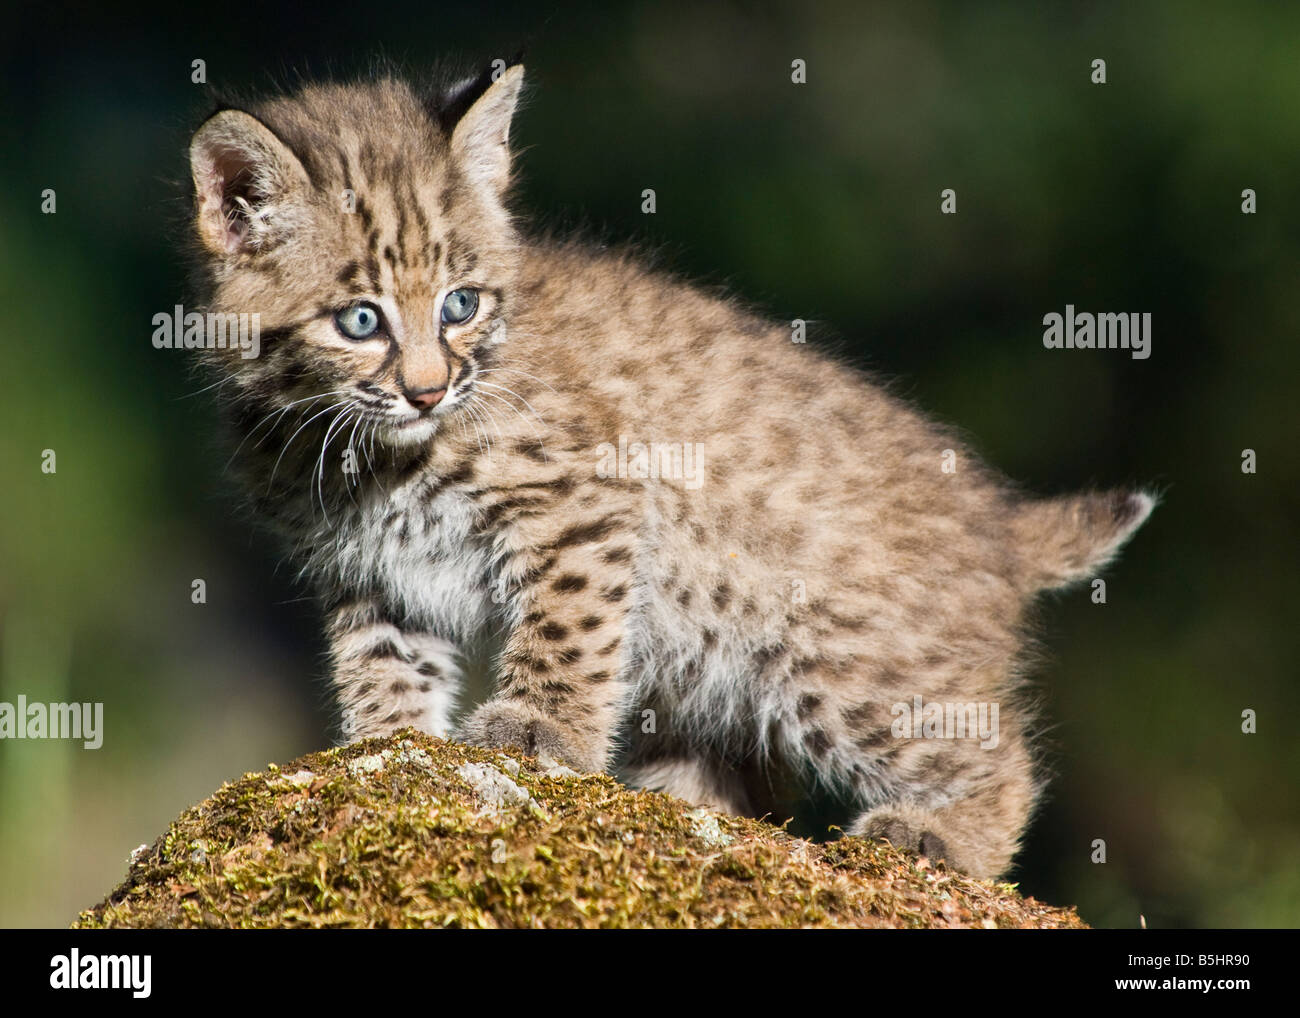 Bobcat kitten poses atop a moss covered rock- controlled conditions Stock Photo